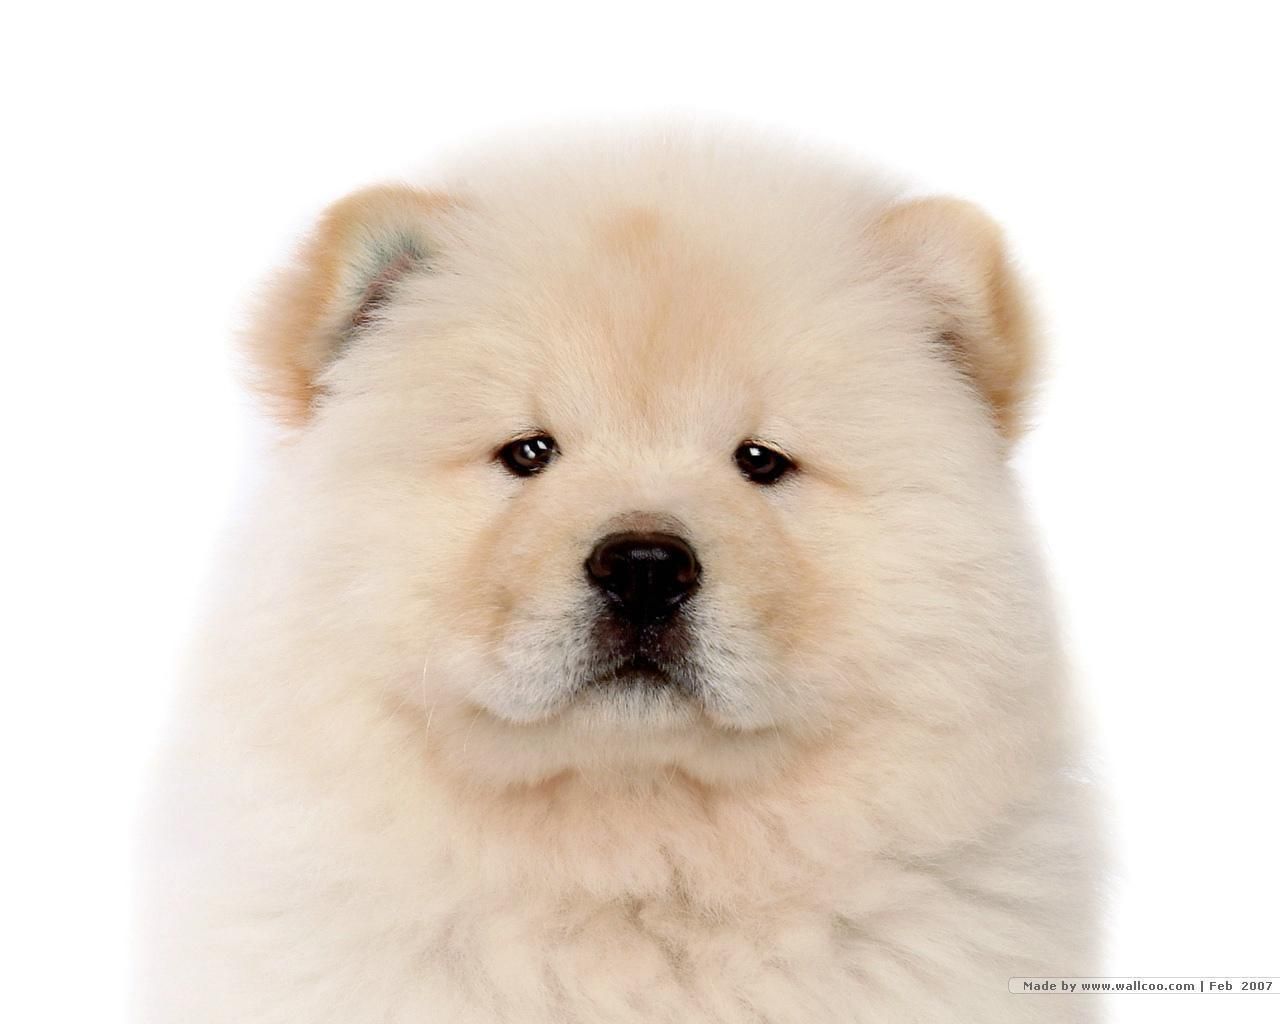 Dogs Wallpaper: Chow Chow Wallpaper. Chow chow puppy, Puppy wallpaper, Puppy picture